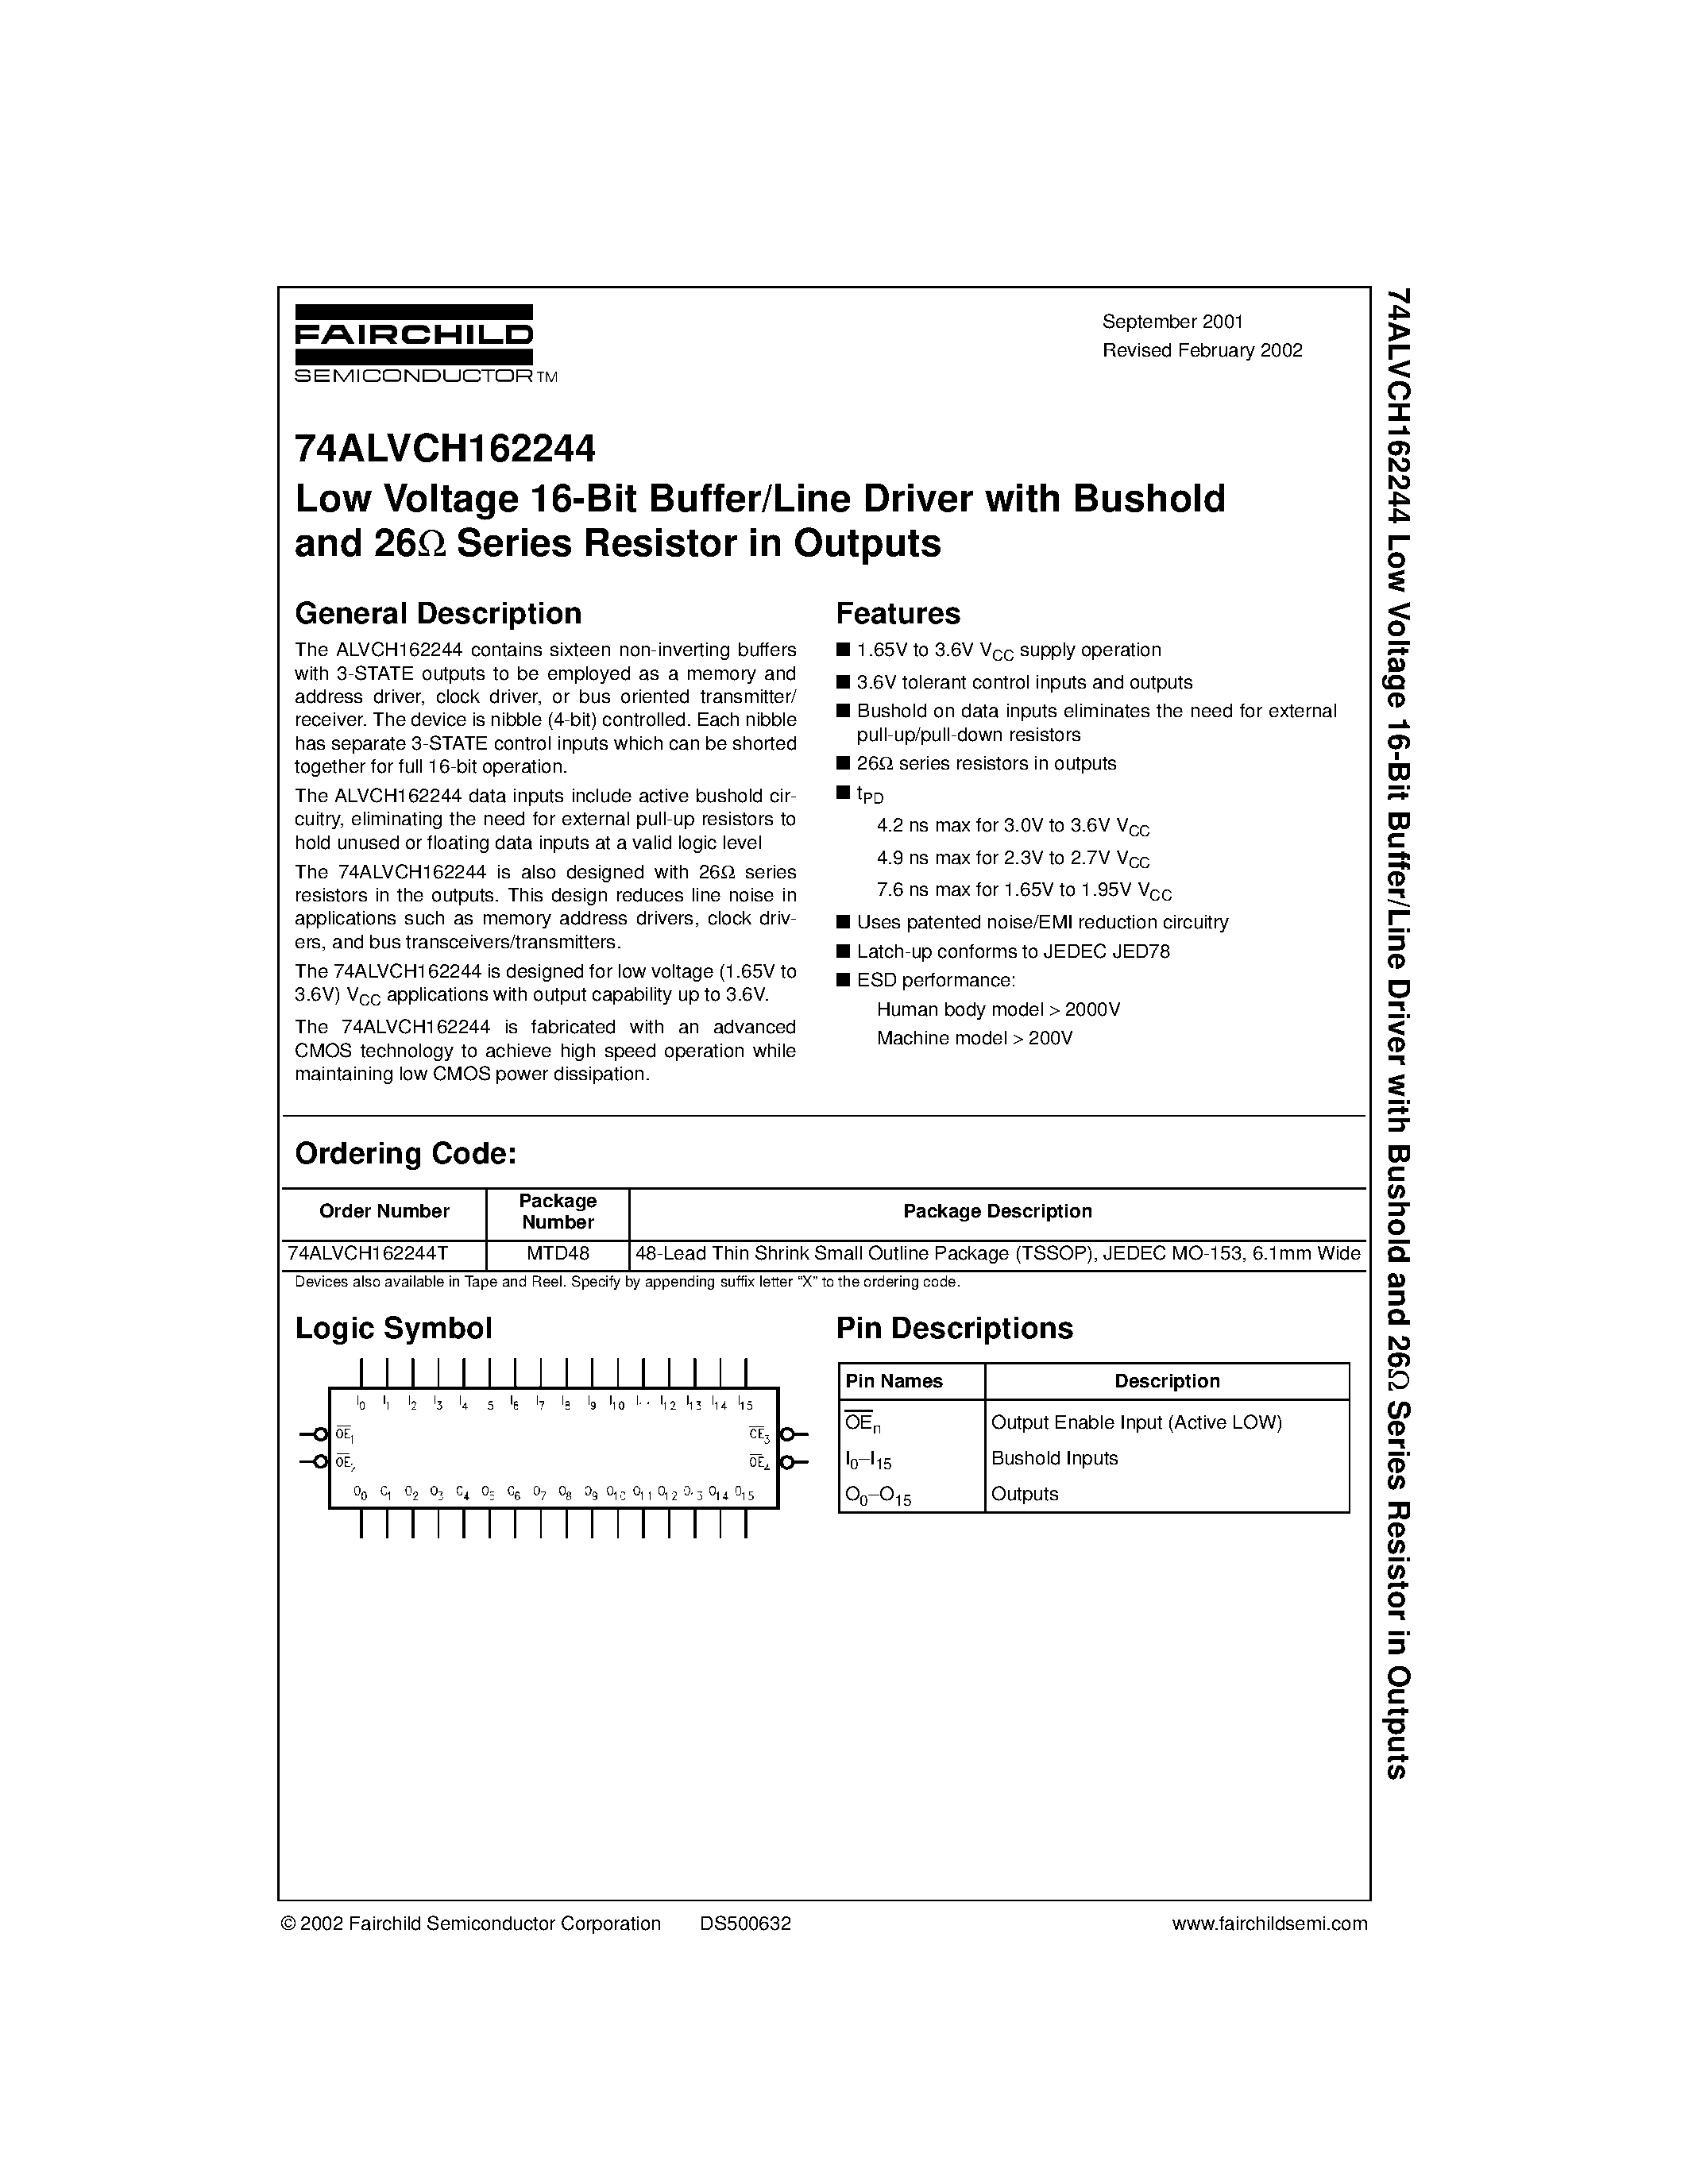 Datasheet 74ALVCH162244T - Low Voltage 16-Bit Buffer/Line Driver with Bushold and 26 Series Resistor in Outputs page 1